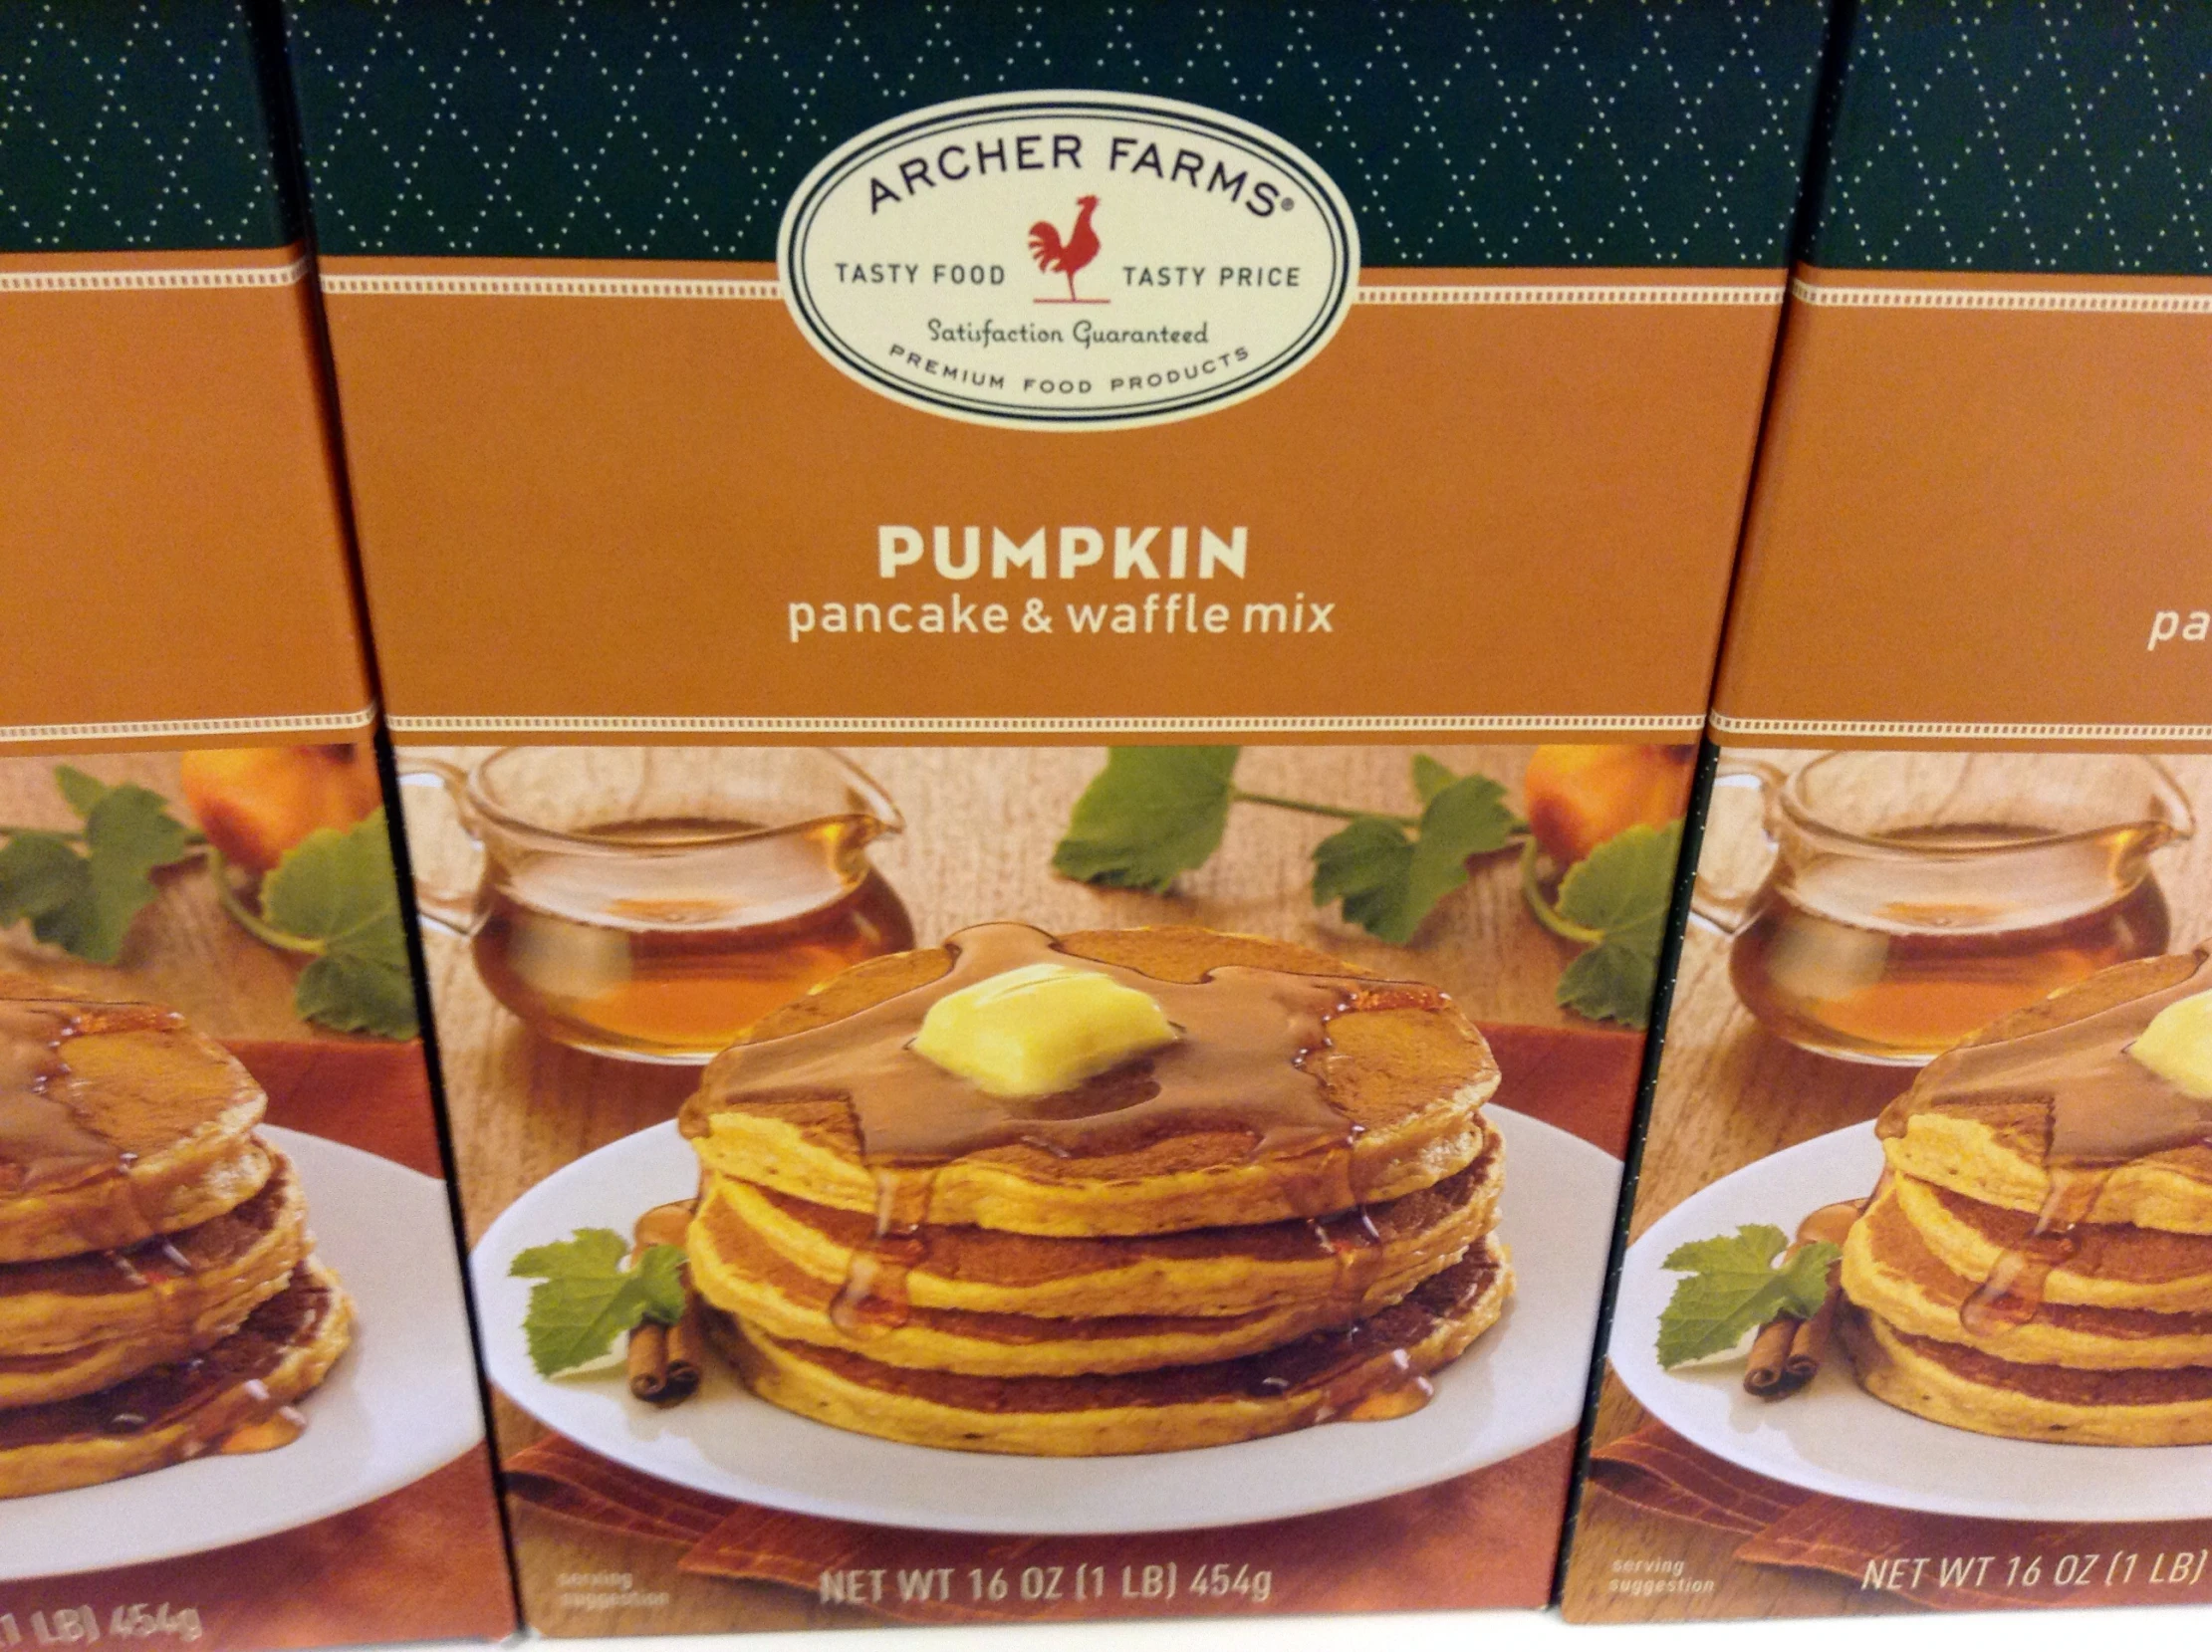 the package of pumpkin pancakes is set on the table